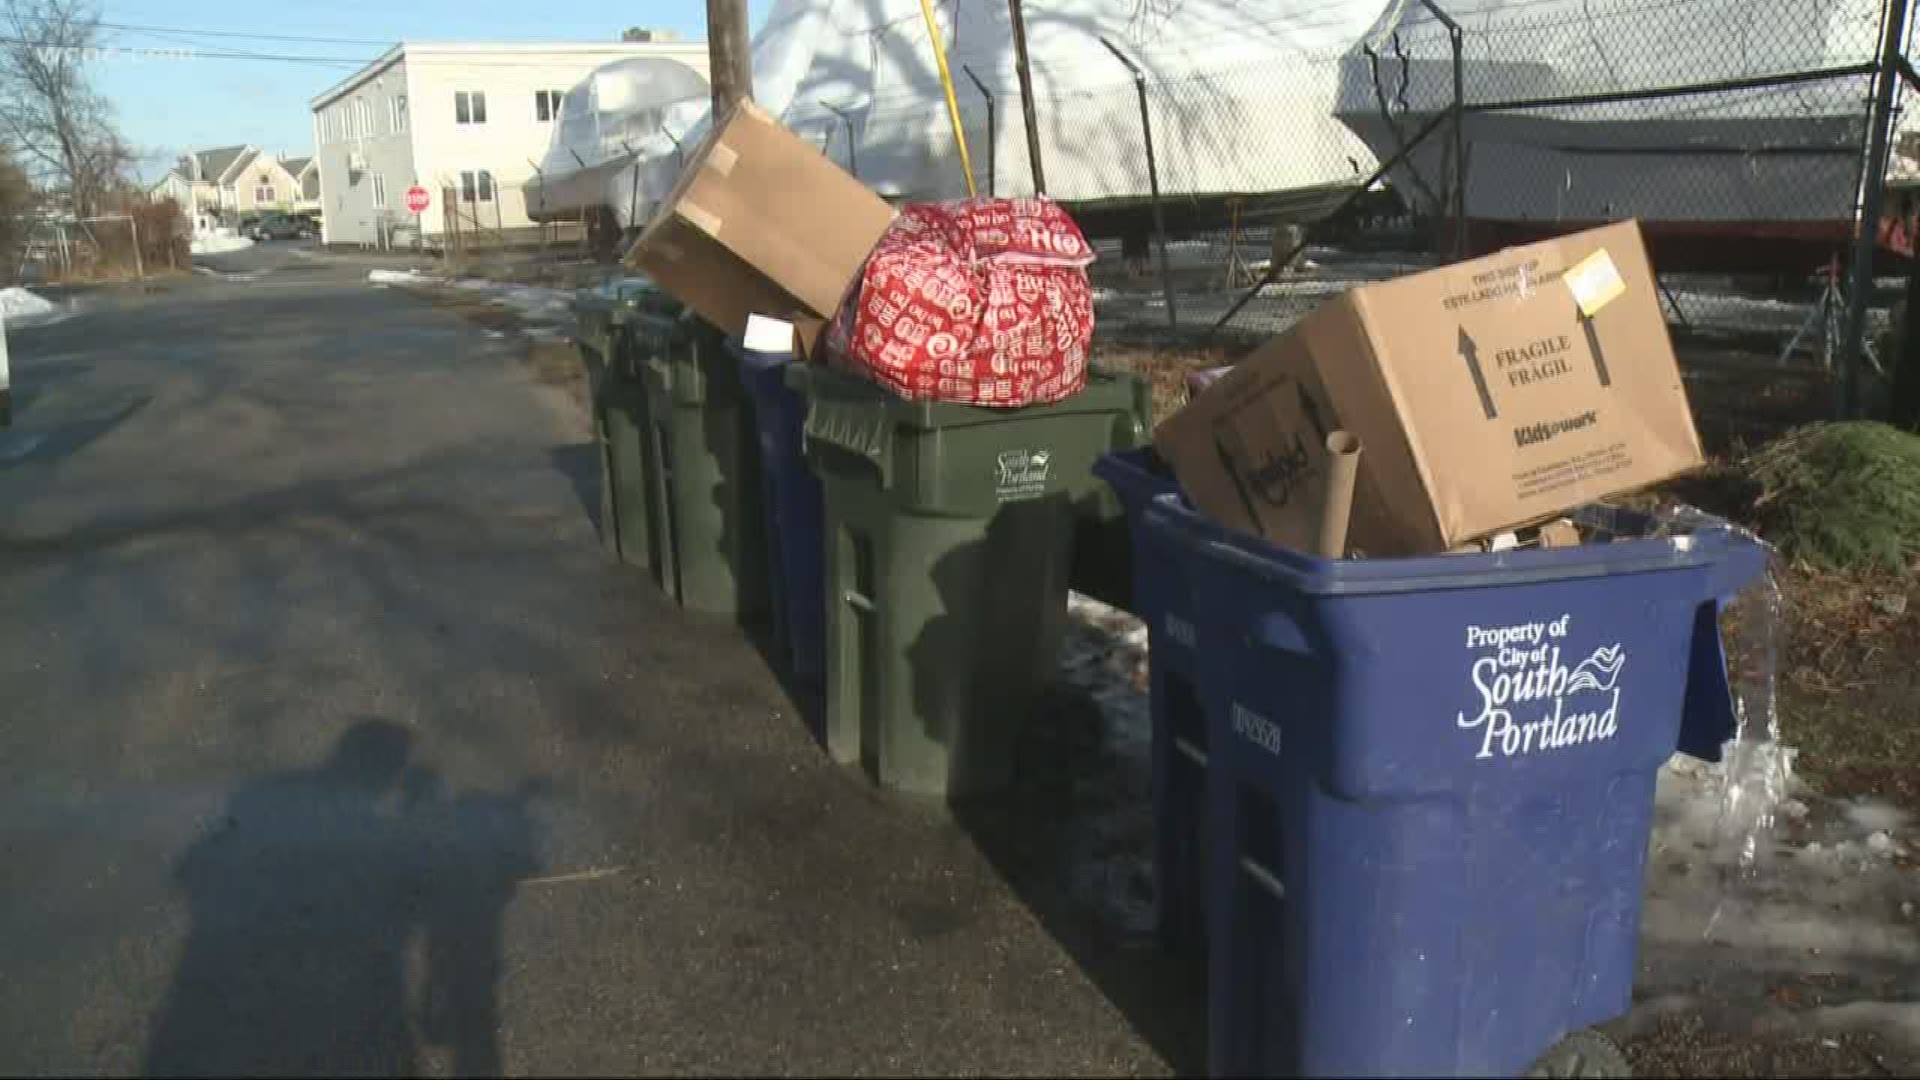 After Christmas, thieves are taking a close look at what’s in trash cans, ready to target houses with brand new gifts.